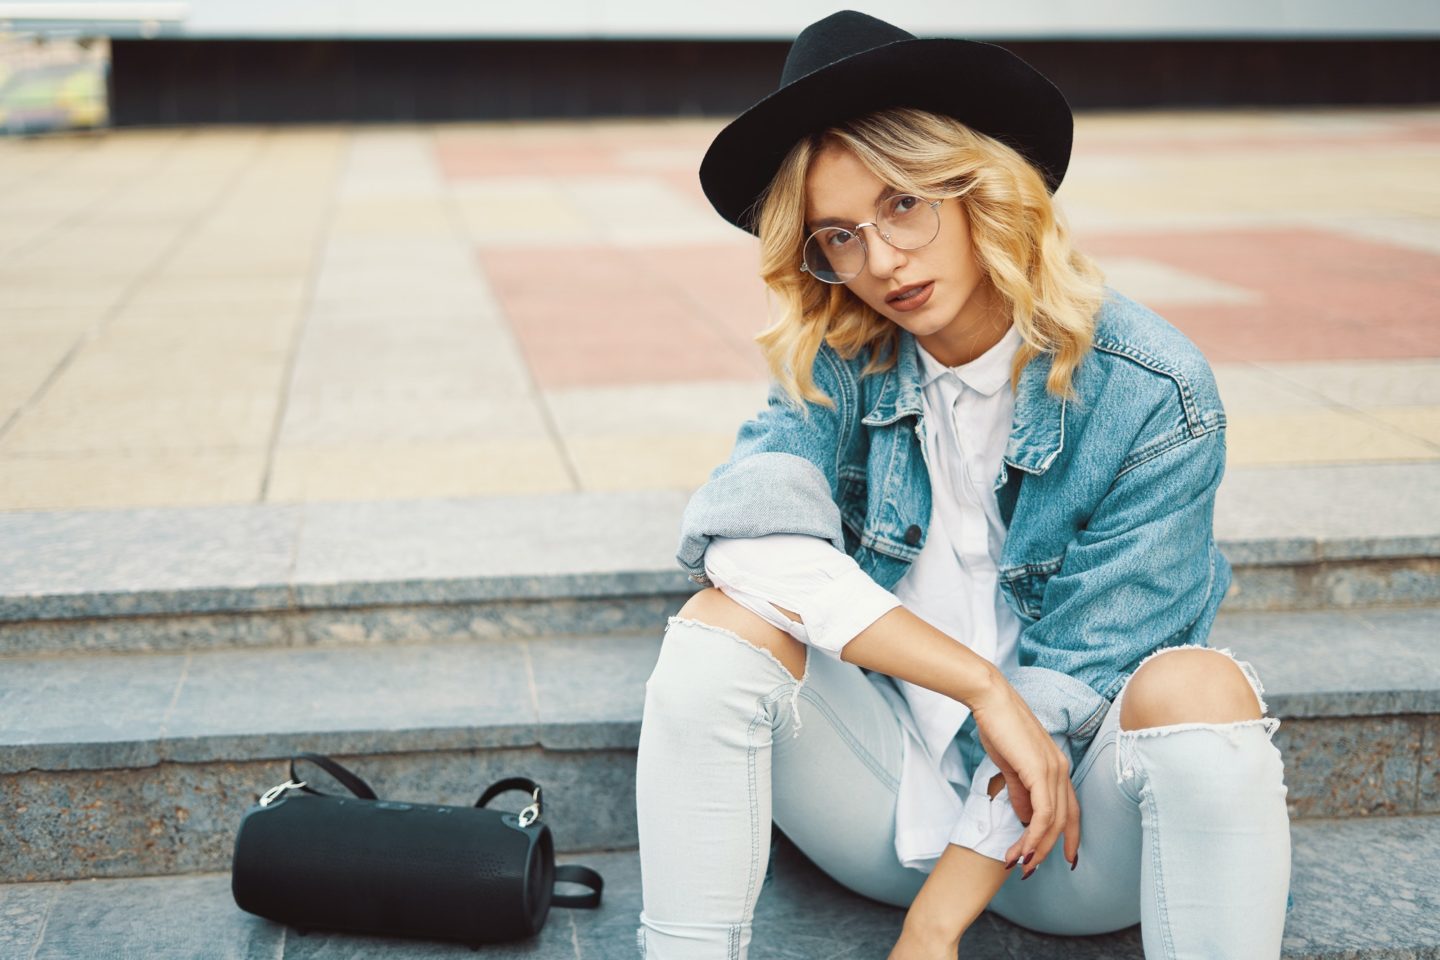 Fashionable modern woman with glasses in the city